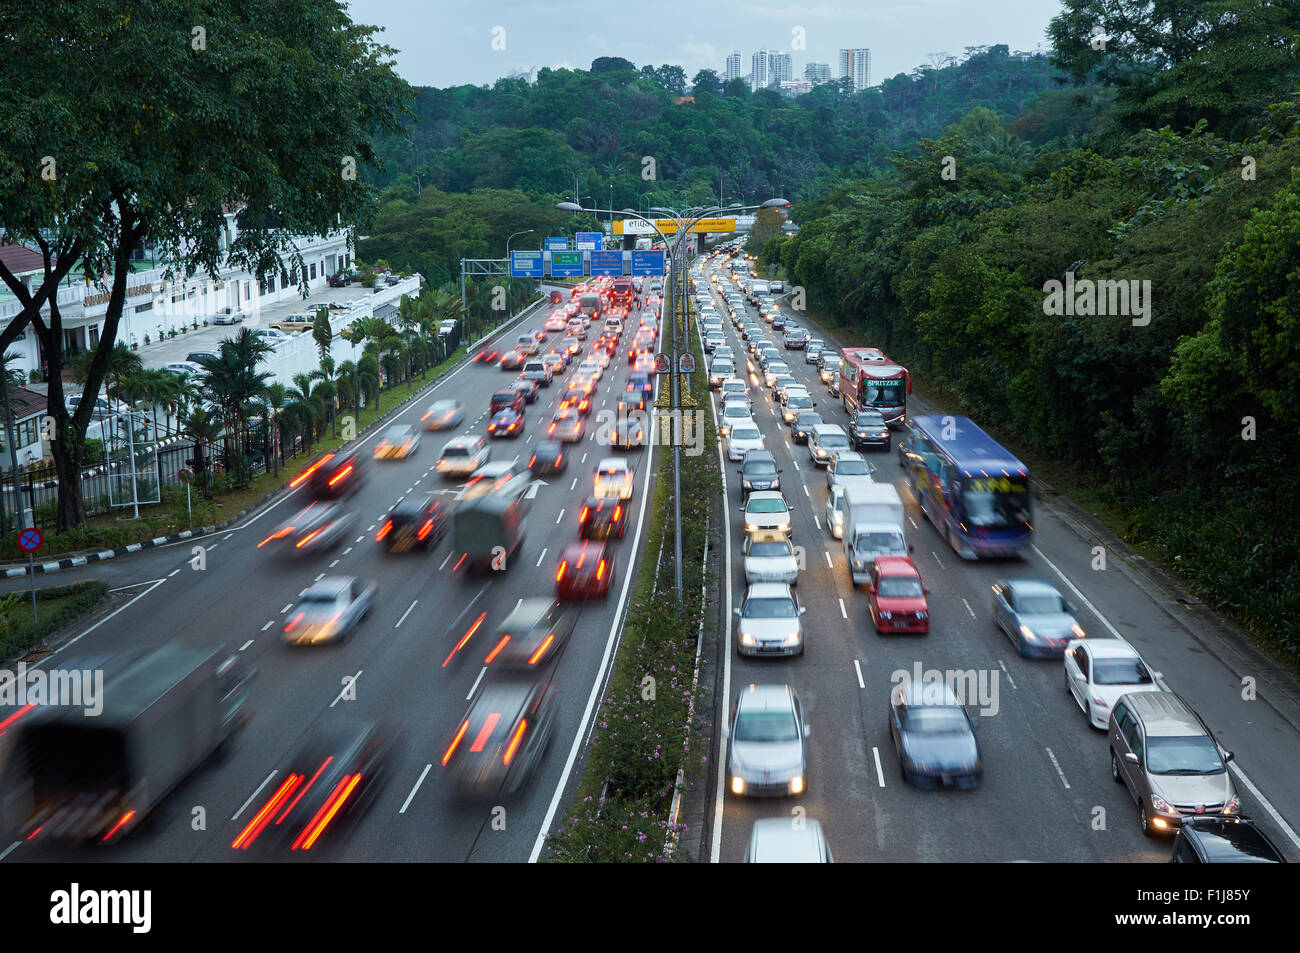 Evening traffic on the left driving road in Malaysia Stock Photo